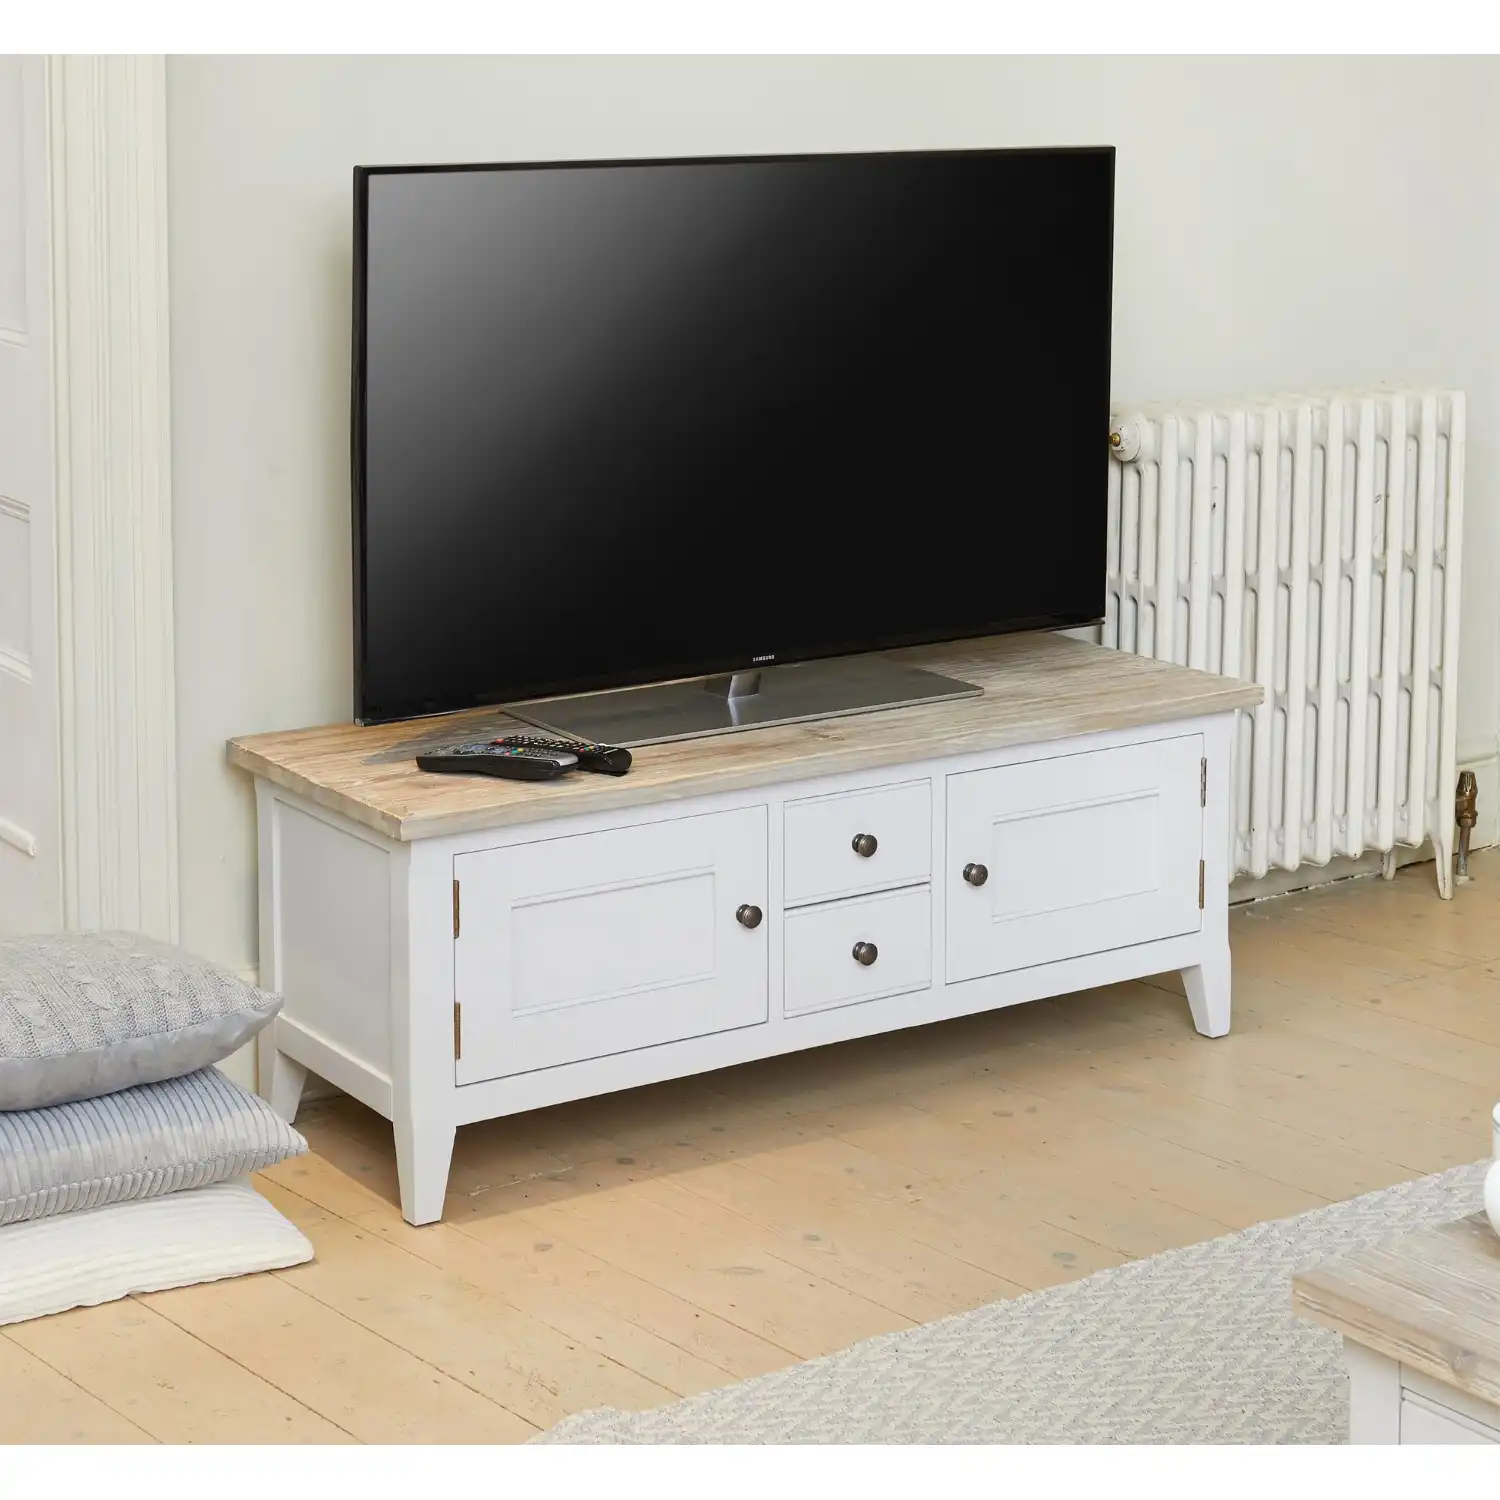 Distressed Grey Painted Widescreen TV Stand Limed Top